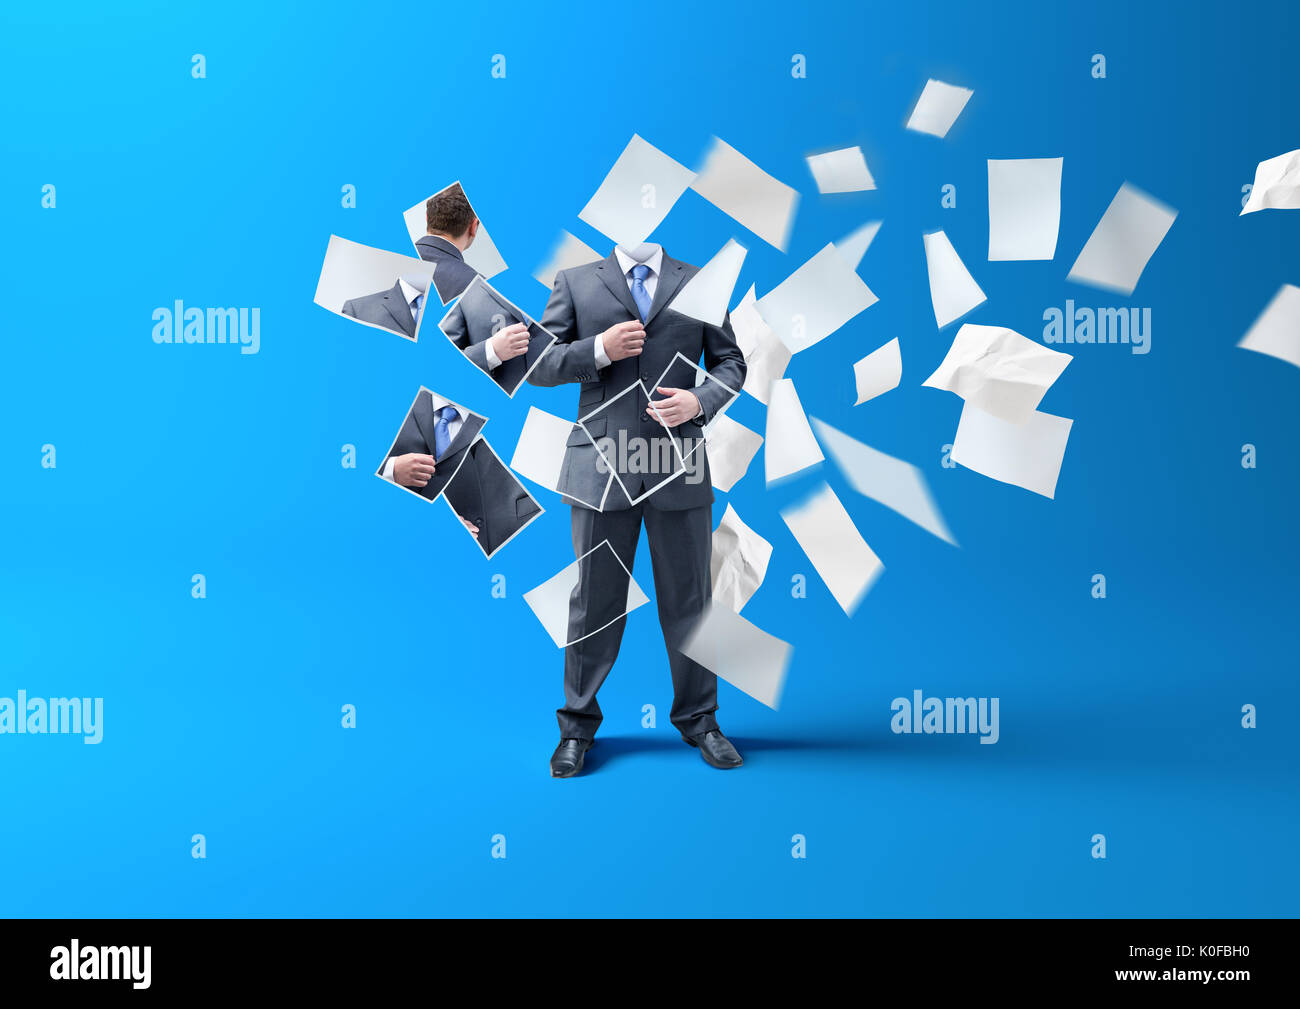 Printing A businessman. A person being made/ lost in printed paper blowing in the wind. business concept. Stock Photo